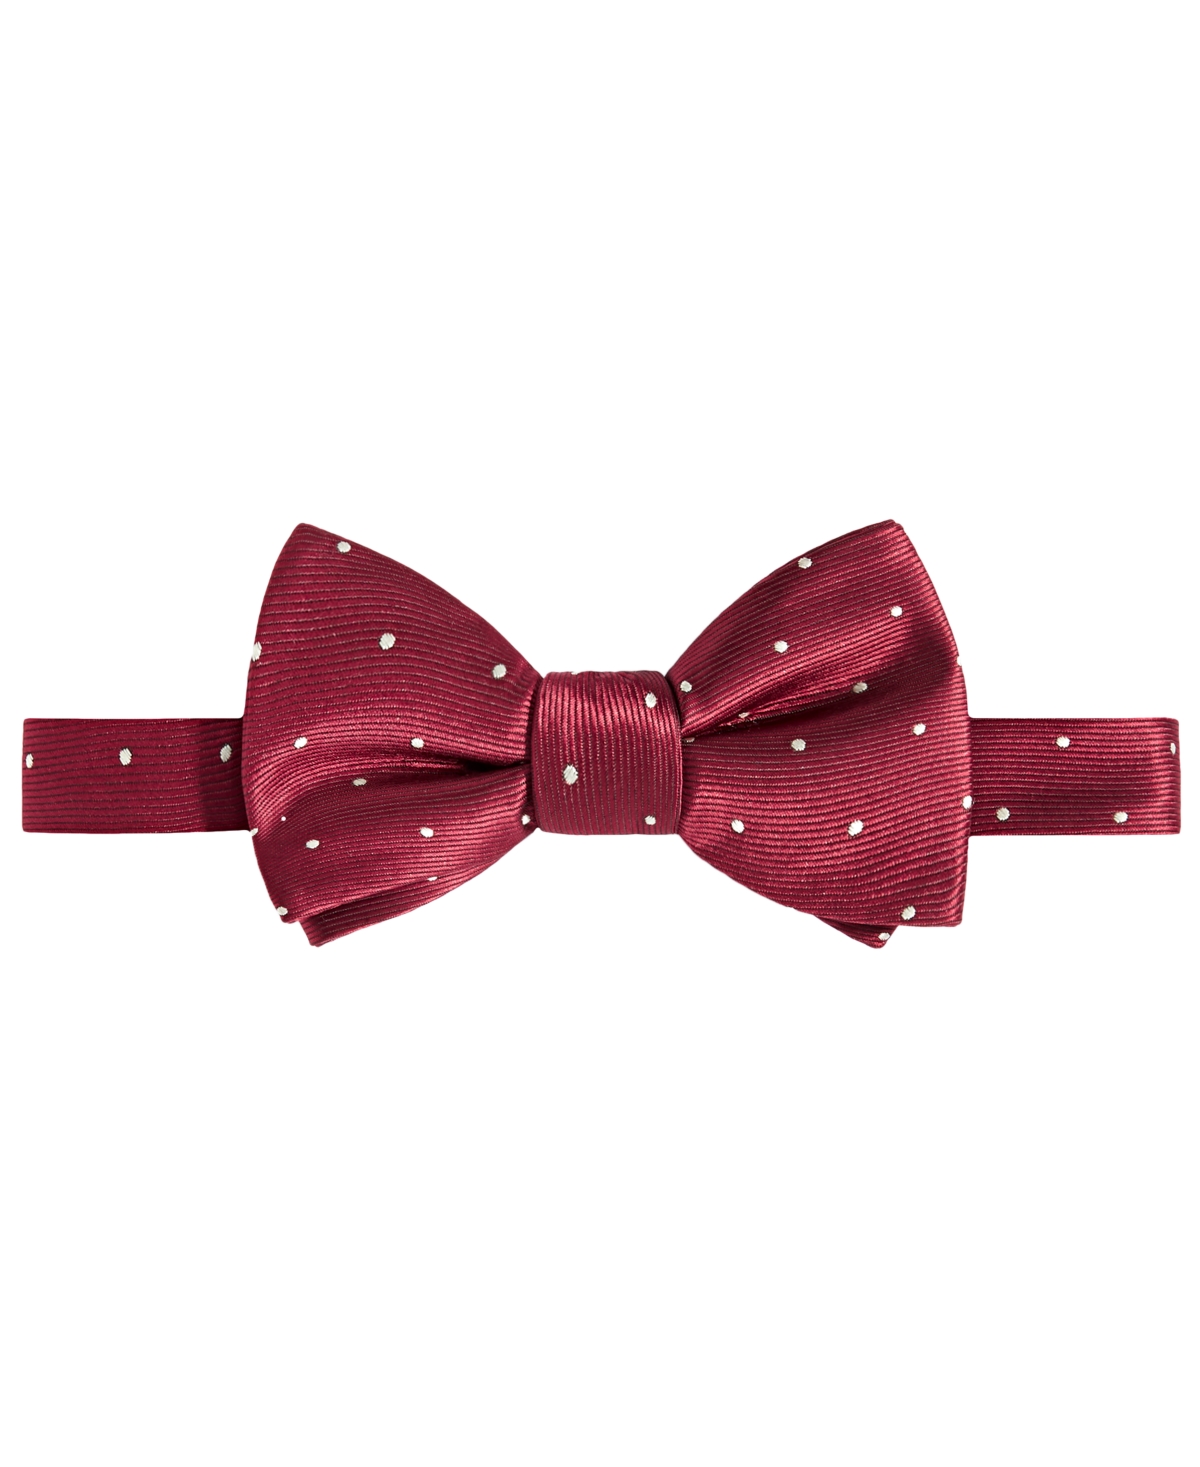 Tayion Collection Men's Crimson & Cream Dot Bow Tie In Burgundy